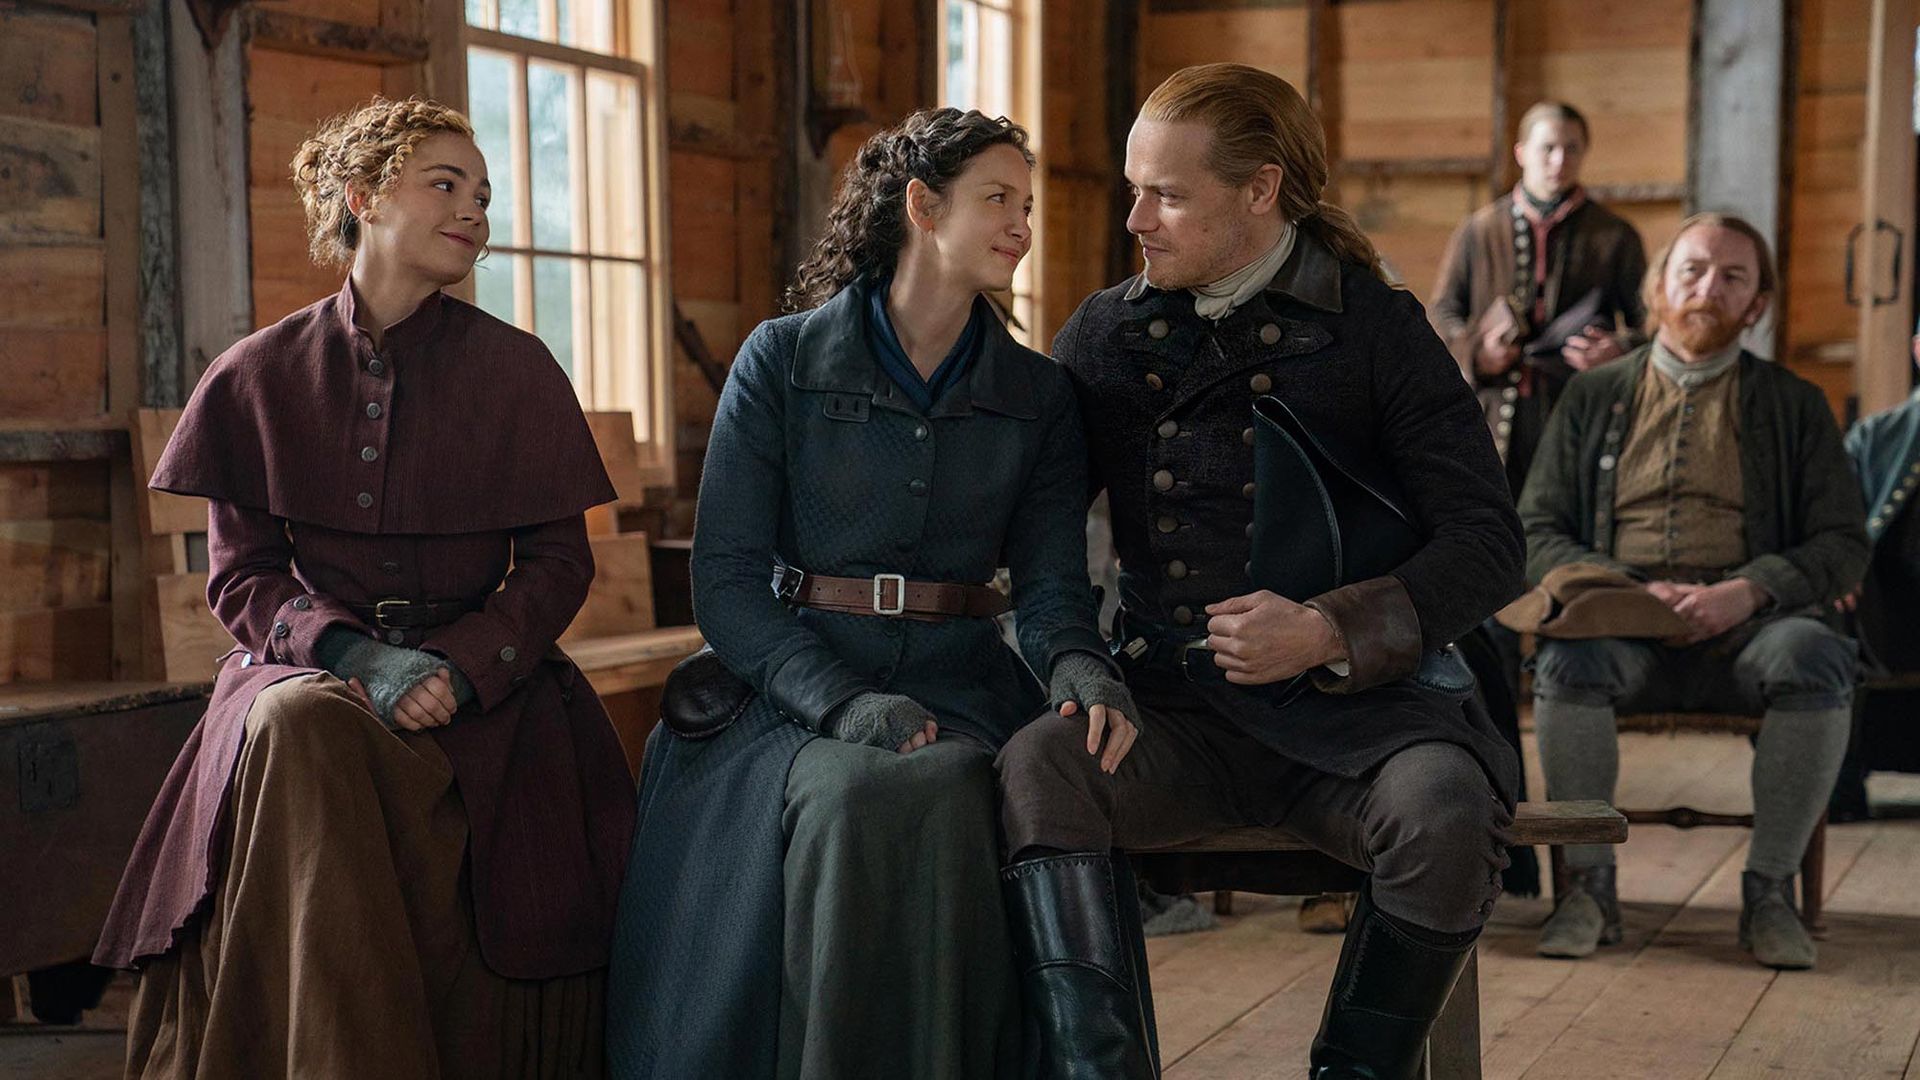 Outlander season 6 release date, trailer, cast and more Tom's Guide